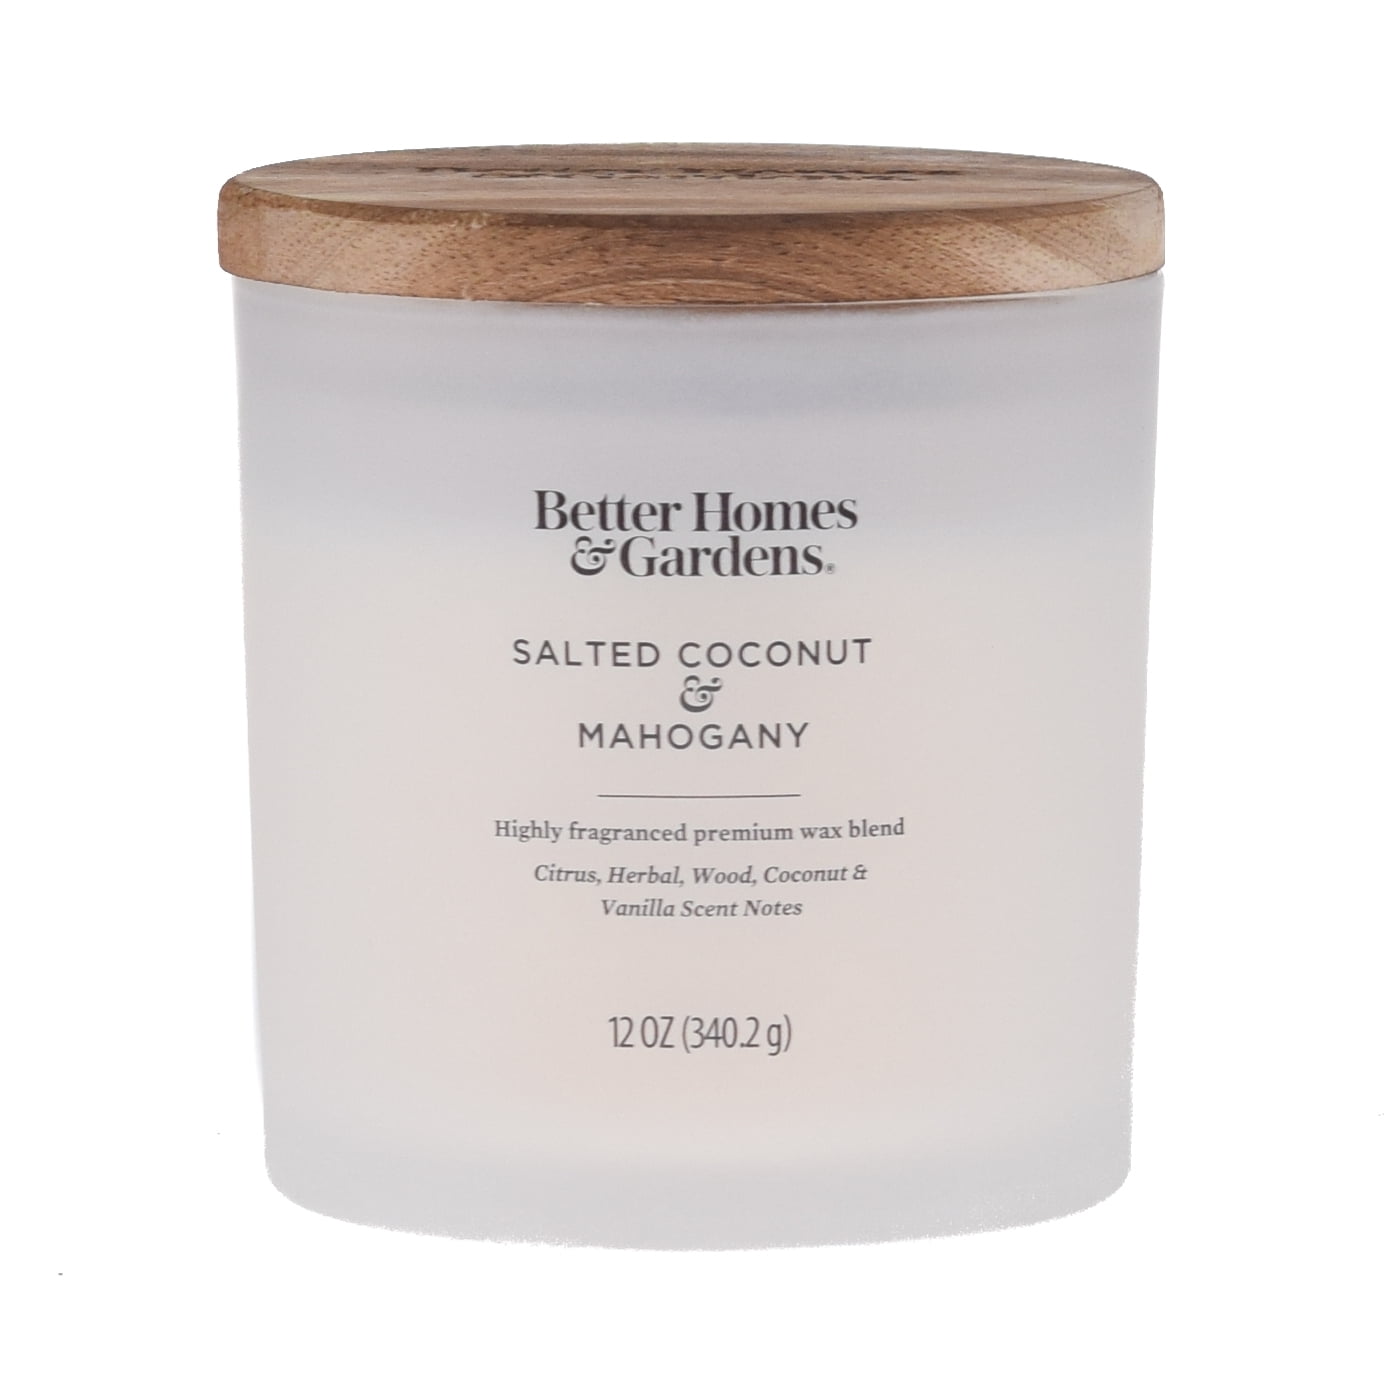 Better Homes & Gardens 12oz Salted Coconut & Mahogany Scented 2-wick Jar Candle